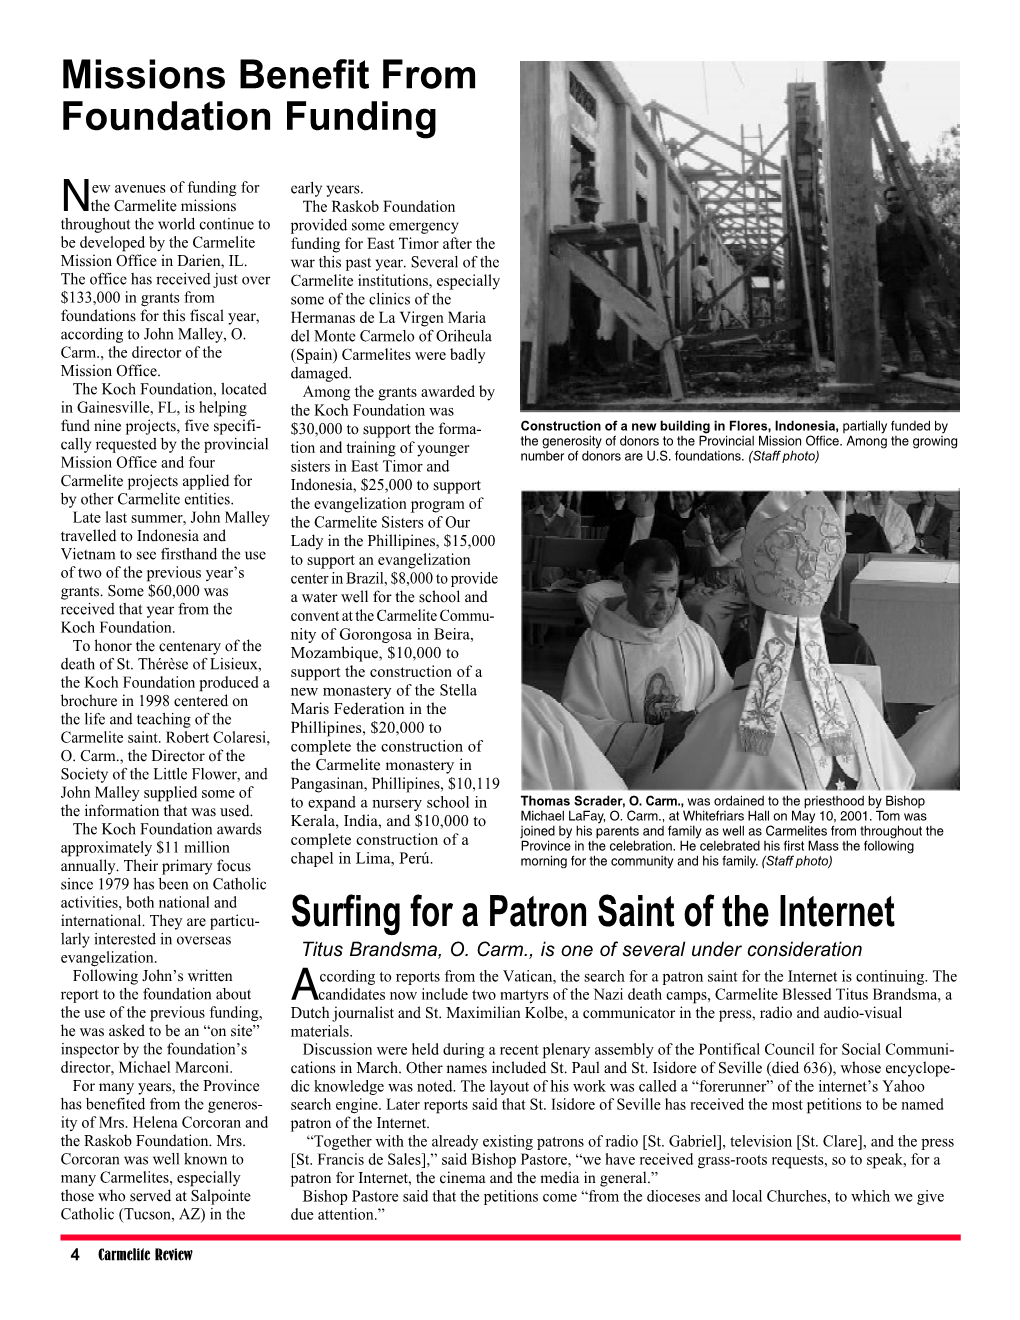 Surfing for a Patron Saint of the Internet Larly Interested in Overseas Evangelization